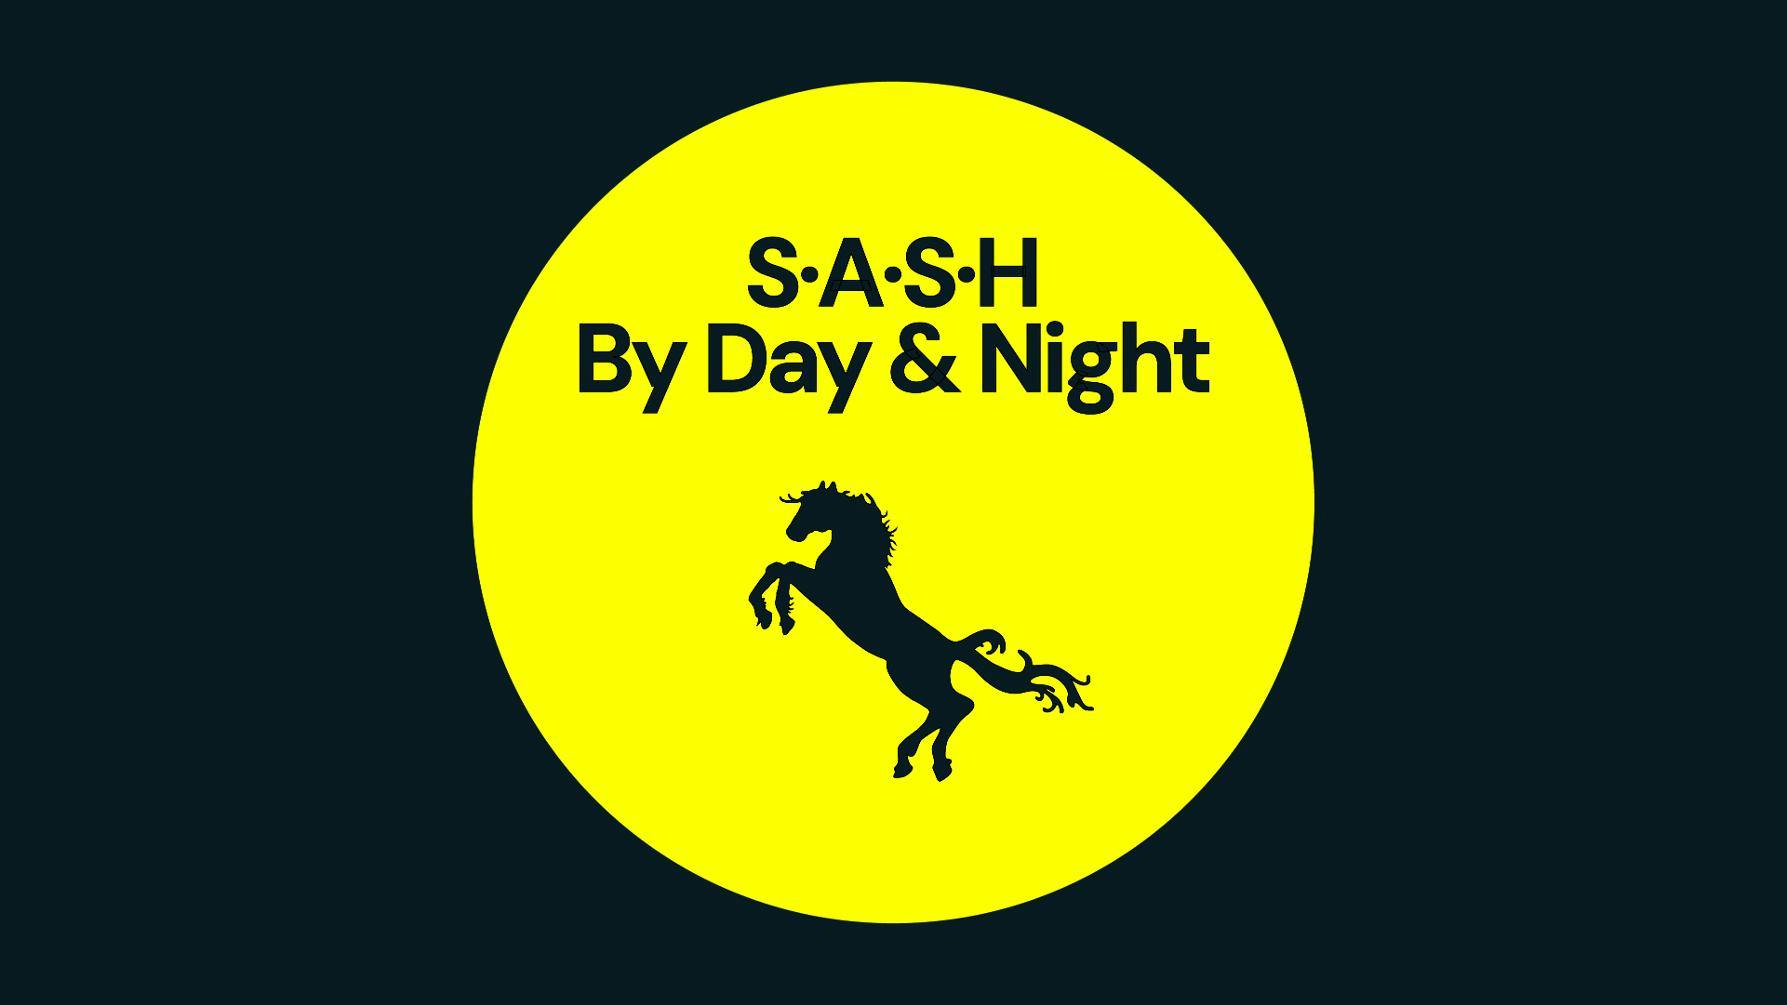 ★ S.A.S.H By Day & Night ★ Sunday 14th July ★